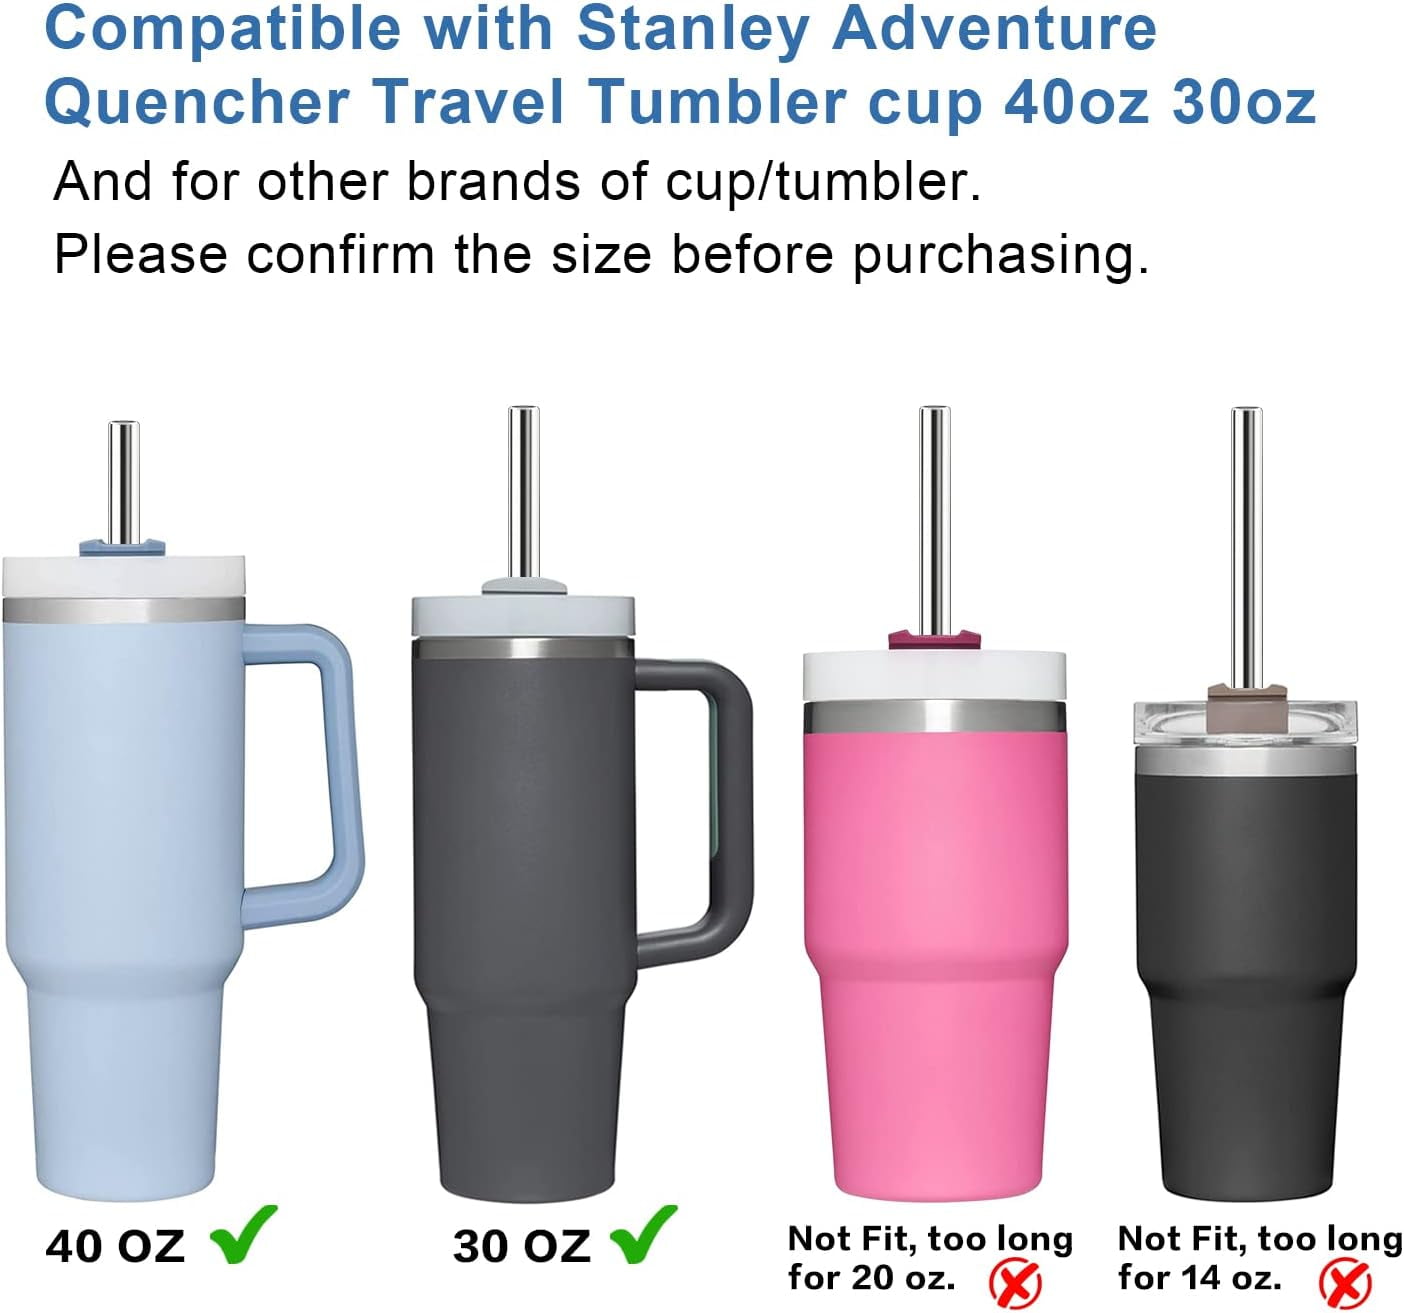  MLKSI Silicone Straw Replacement for Stanley 40 oz 30 oz Cup, 9  Pack Reusable Long Rubber Straw for Stanley Cup & Simple Modern Tumbler  with Handle, Cup Straw for Stanley Quencher